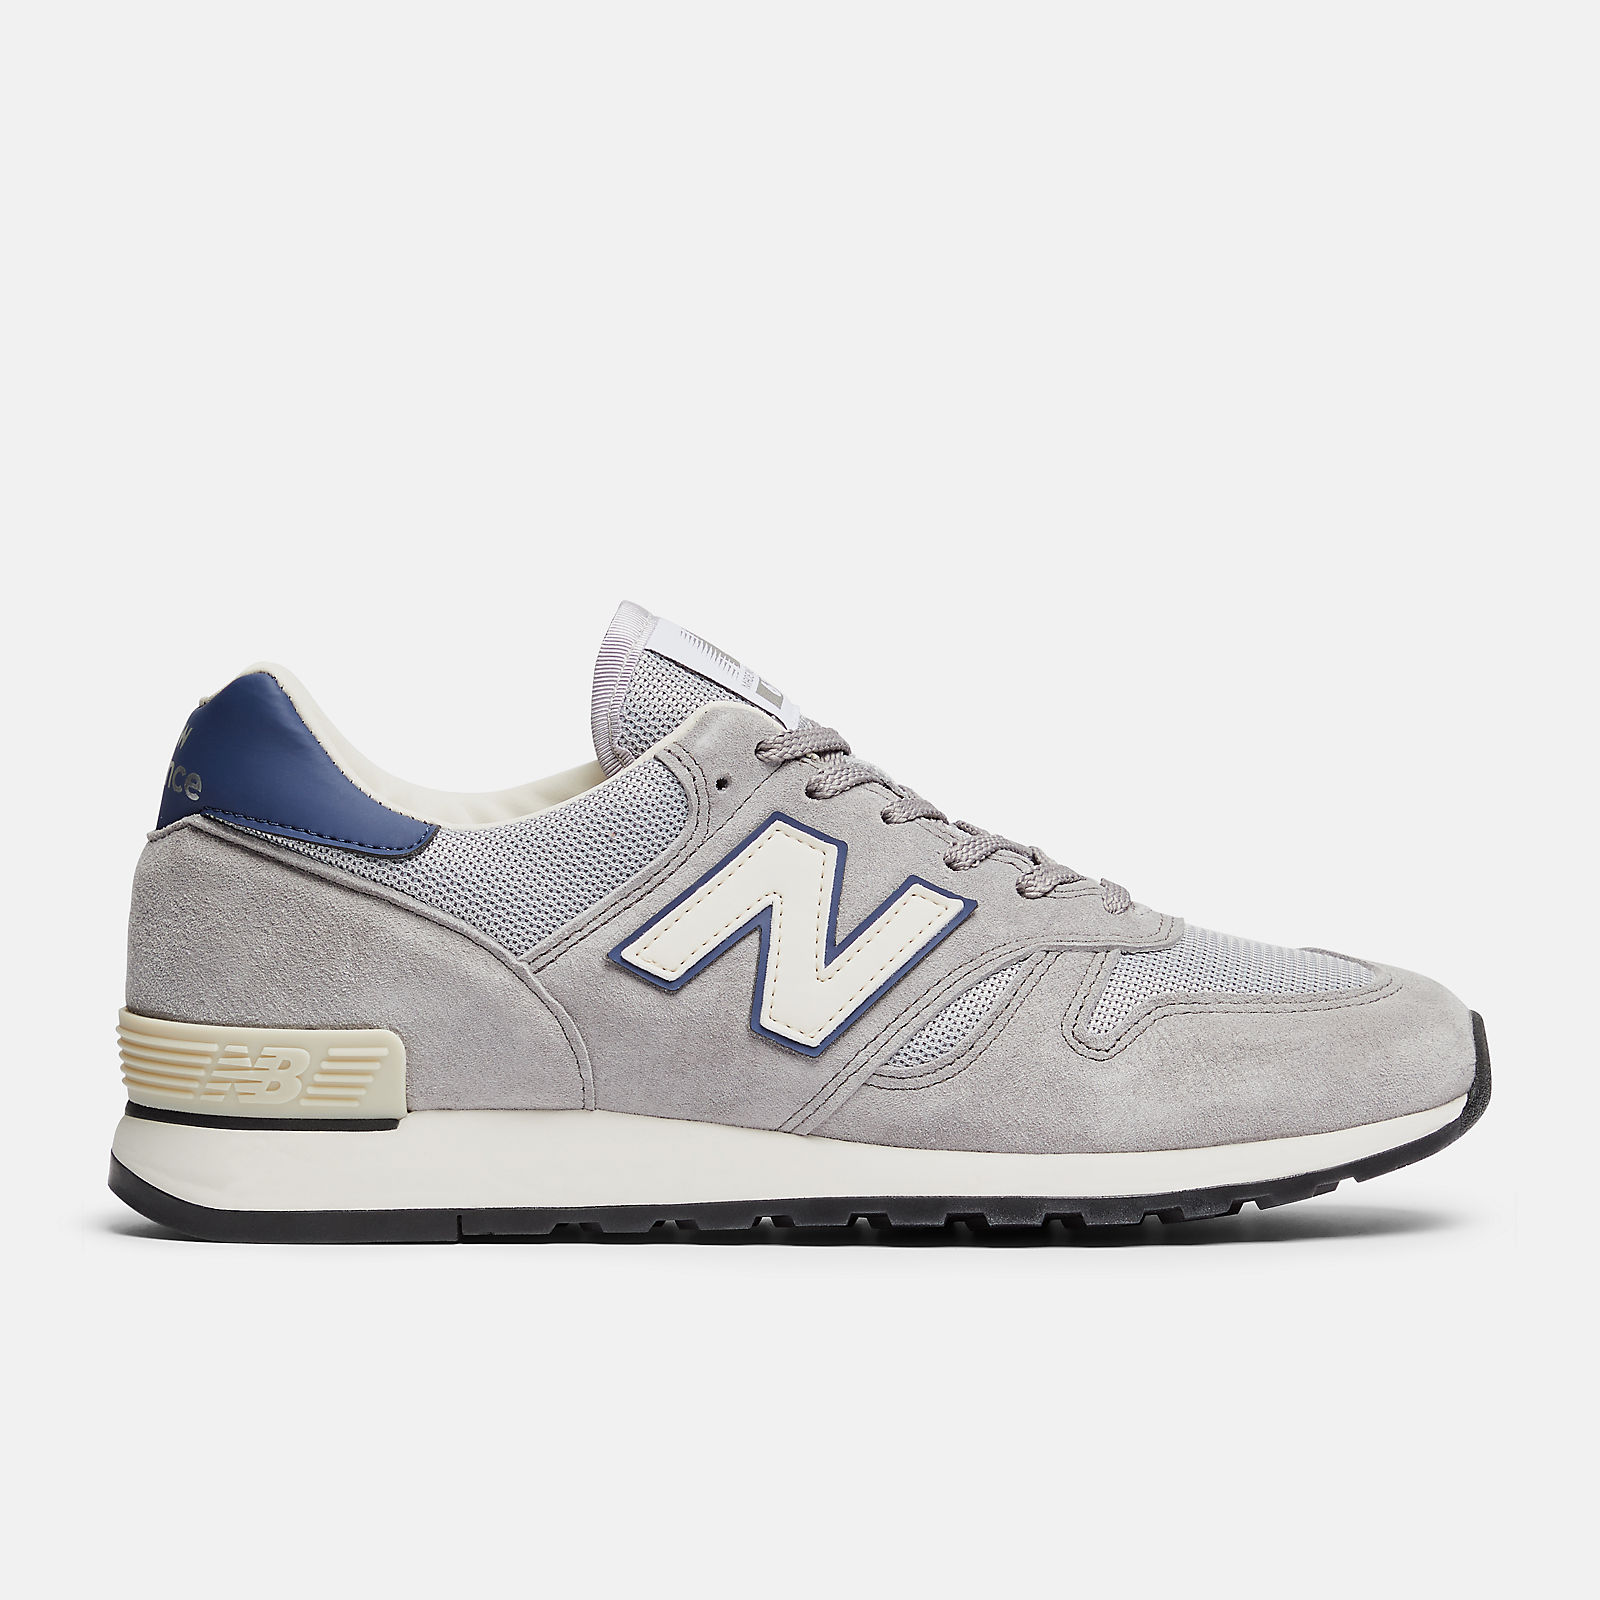 Men's MADE in UK 670 Shoes - New Balance